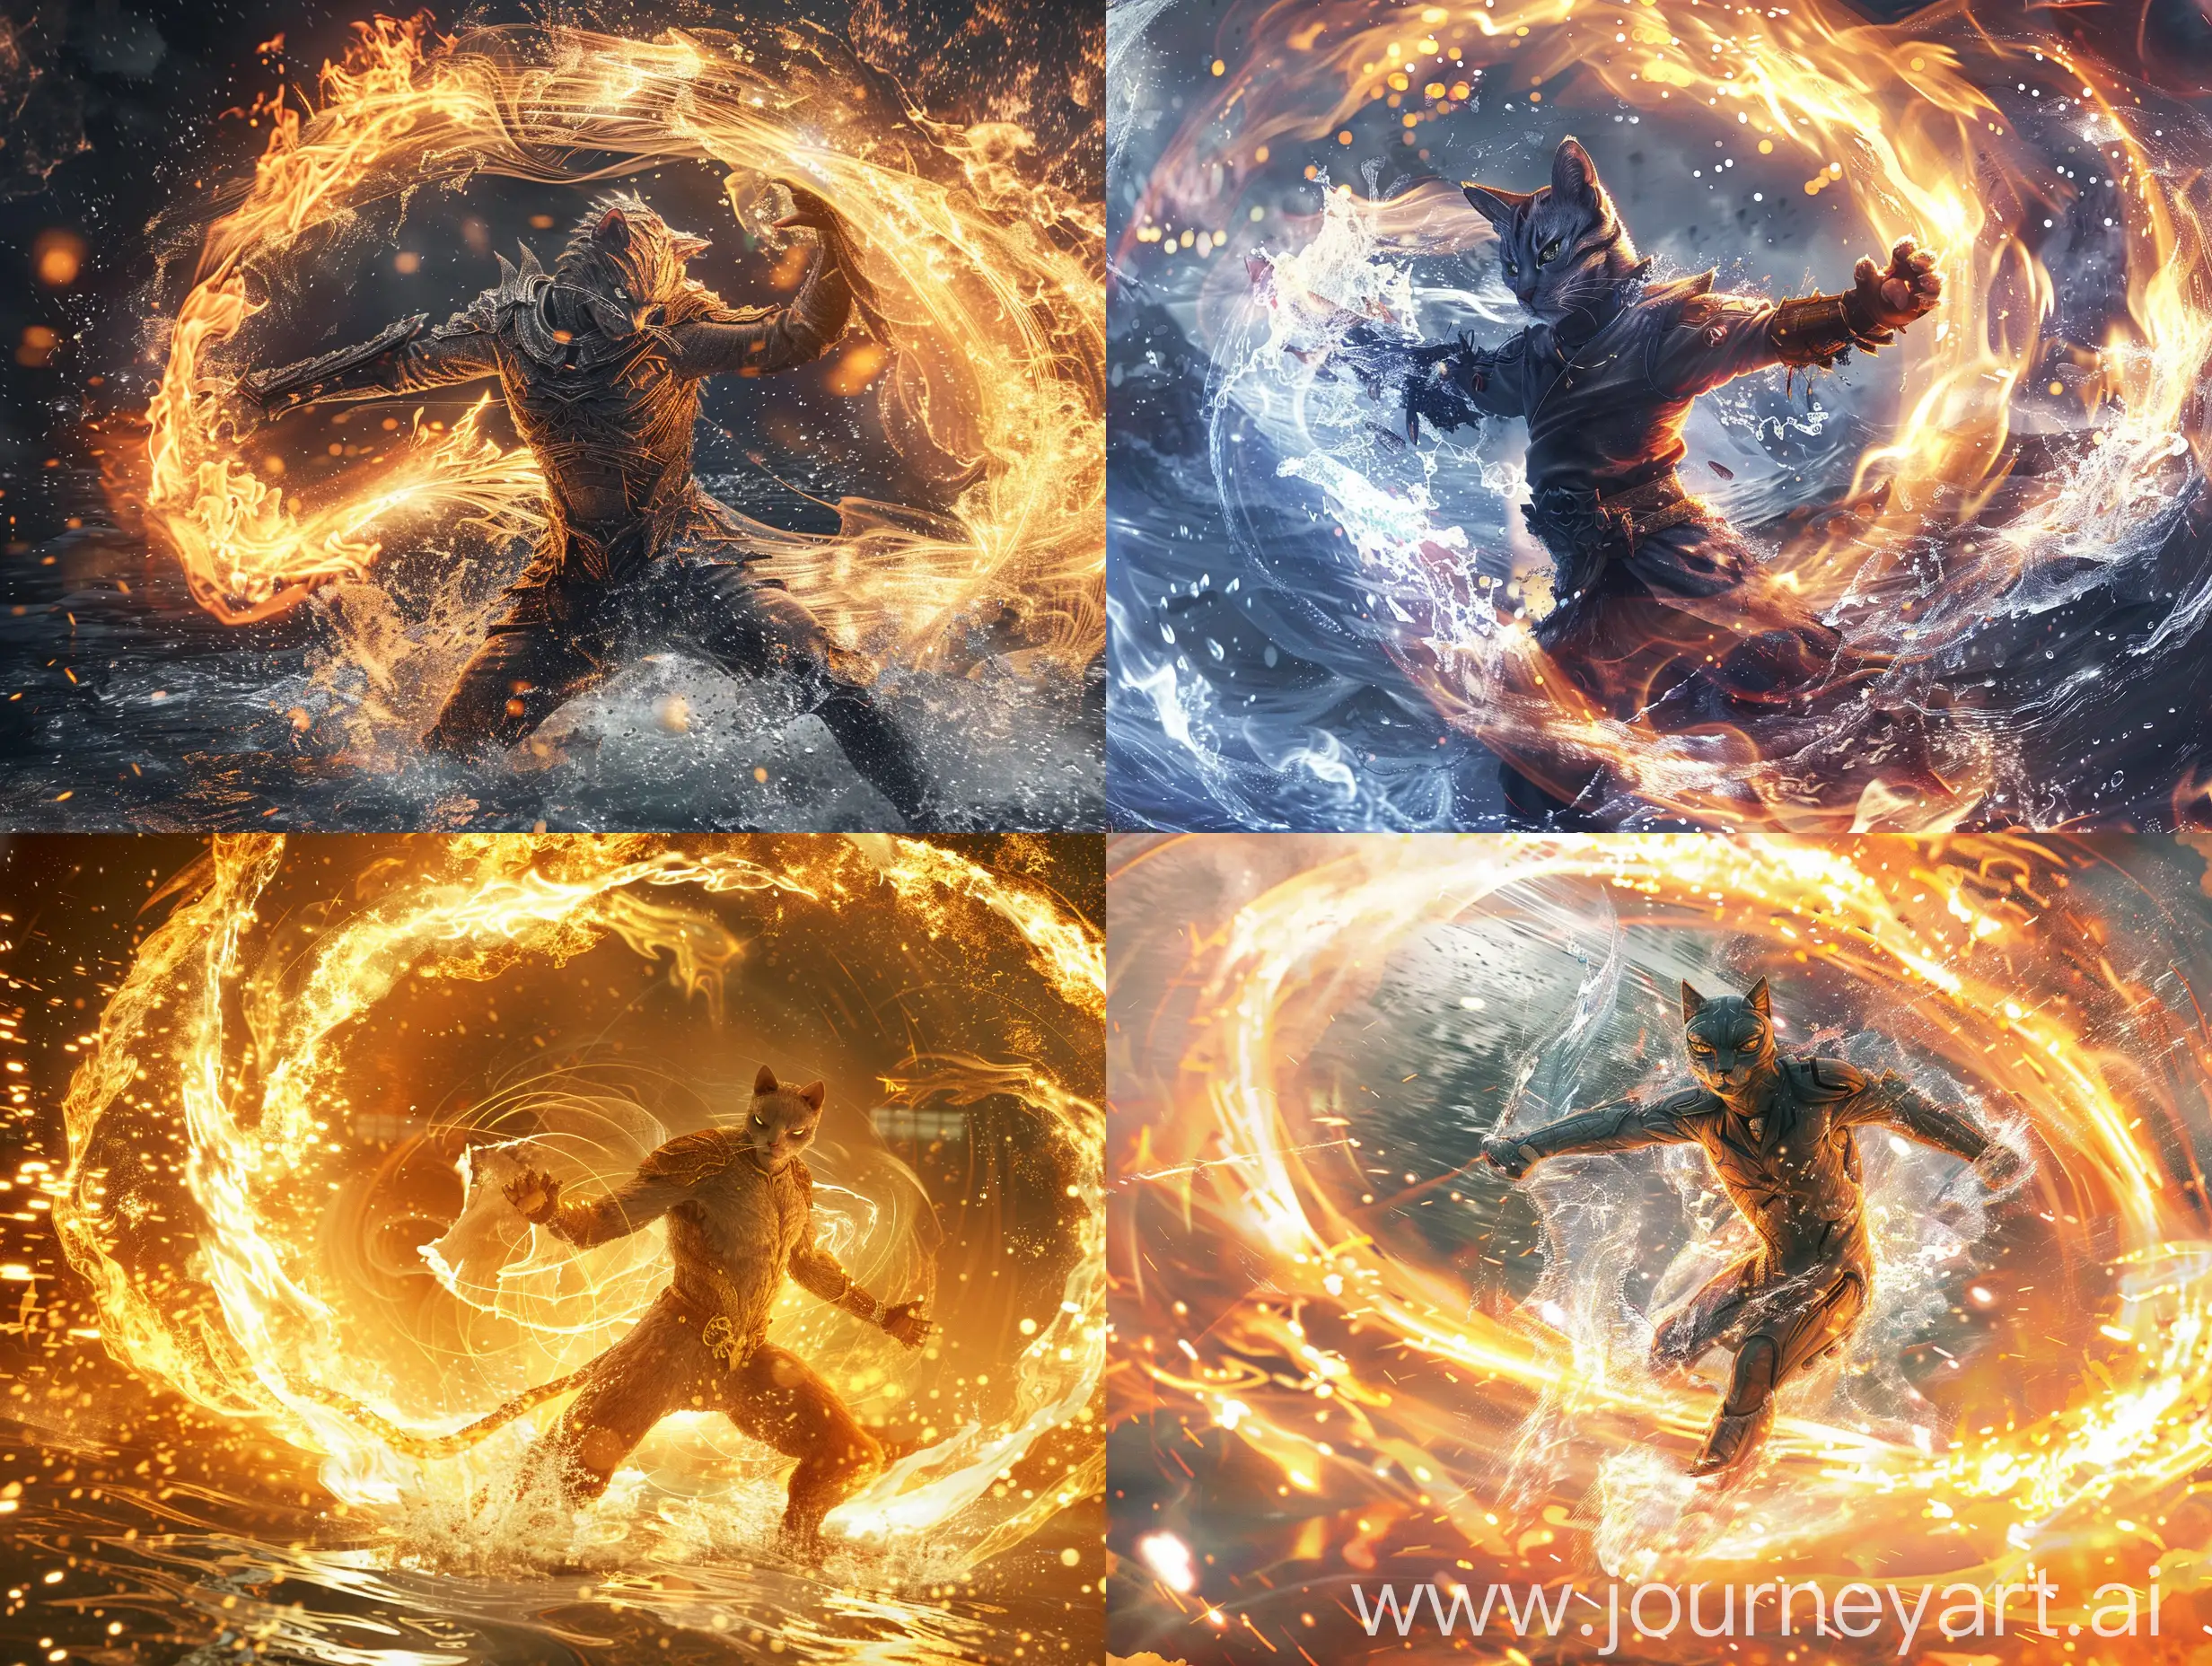 The cat knight performs a move surrounded by water and fire that swirls around him, avatar movie style, full body shot, side view